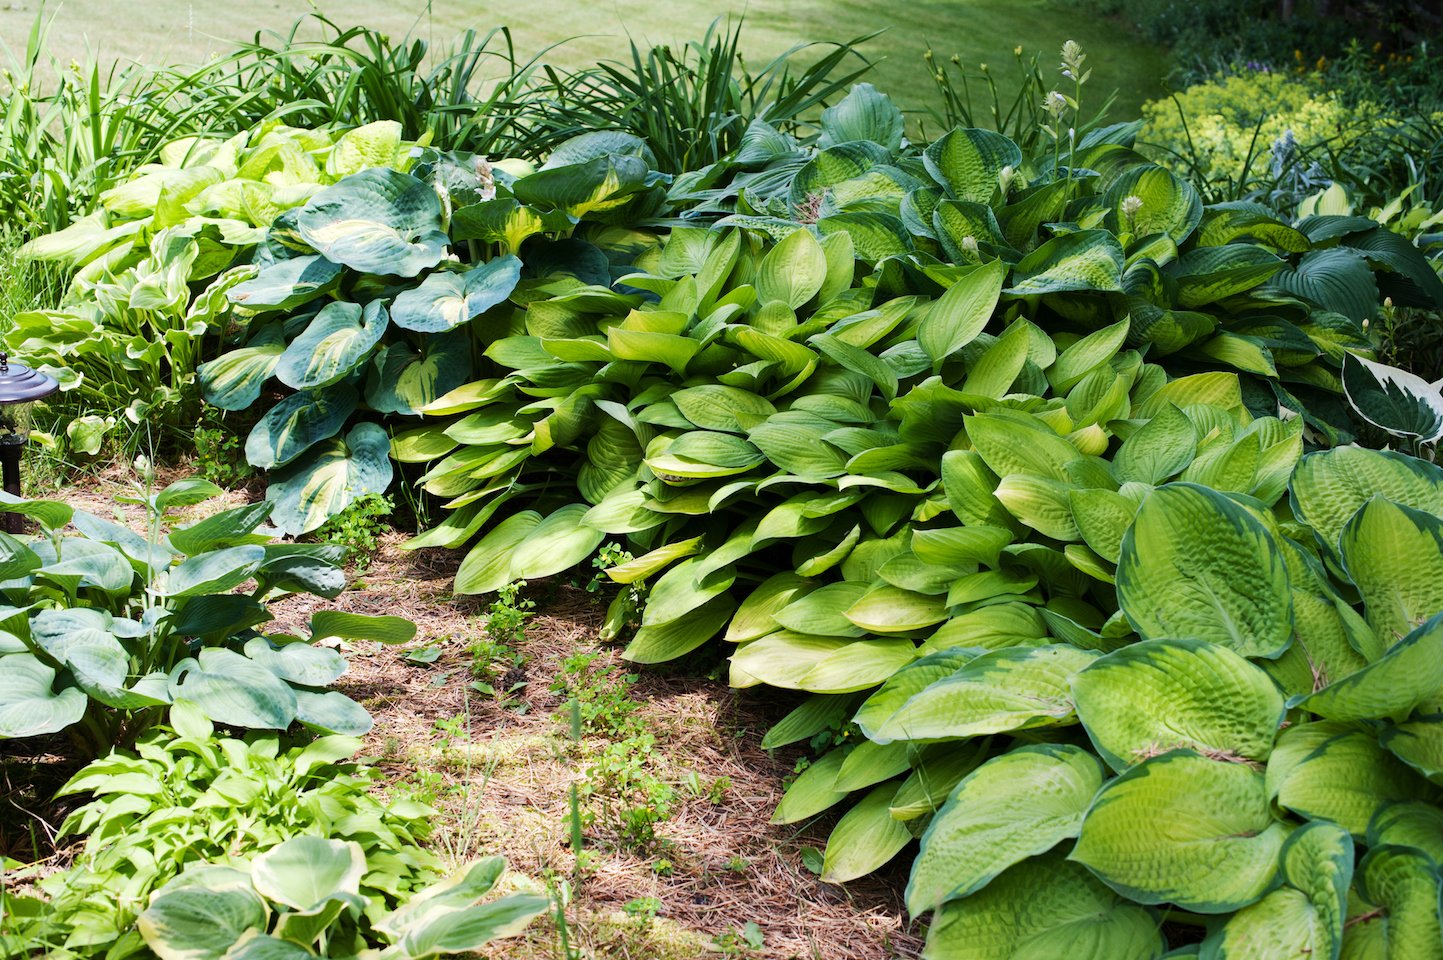 A large number of hostas in a garden